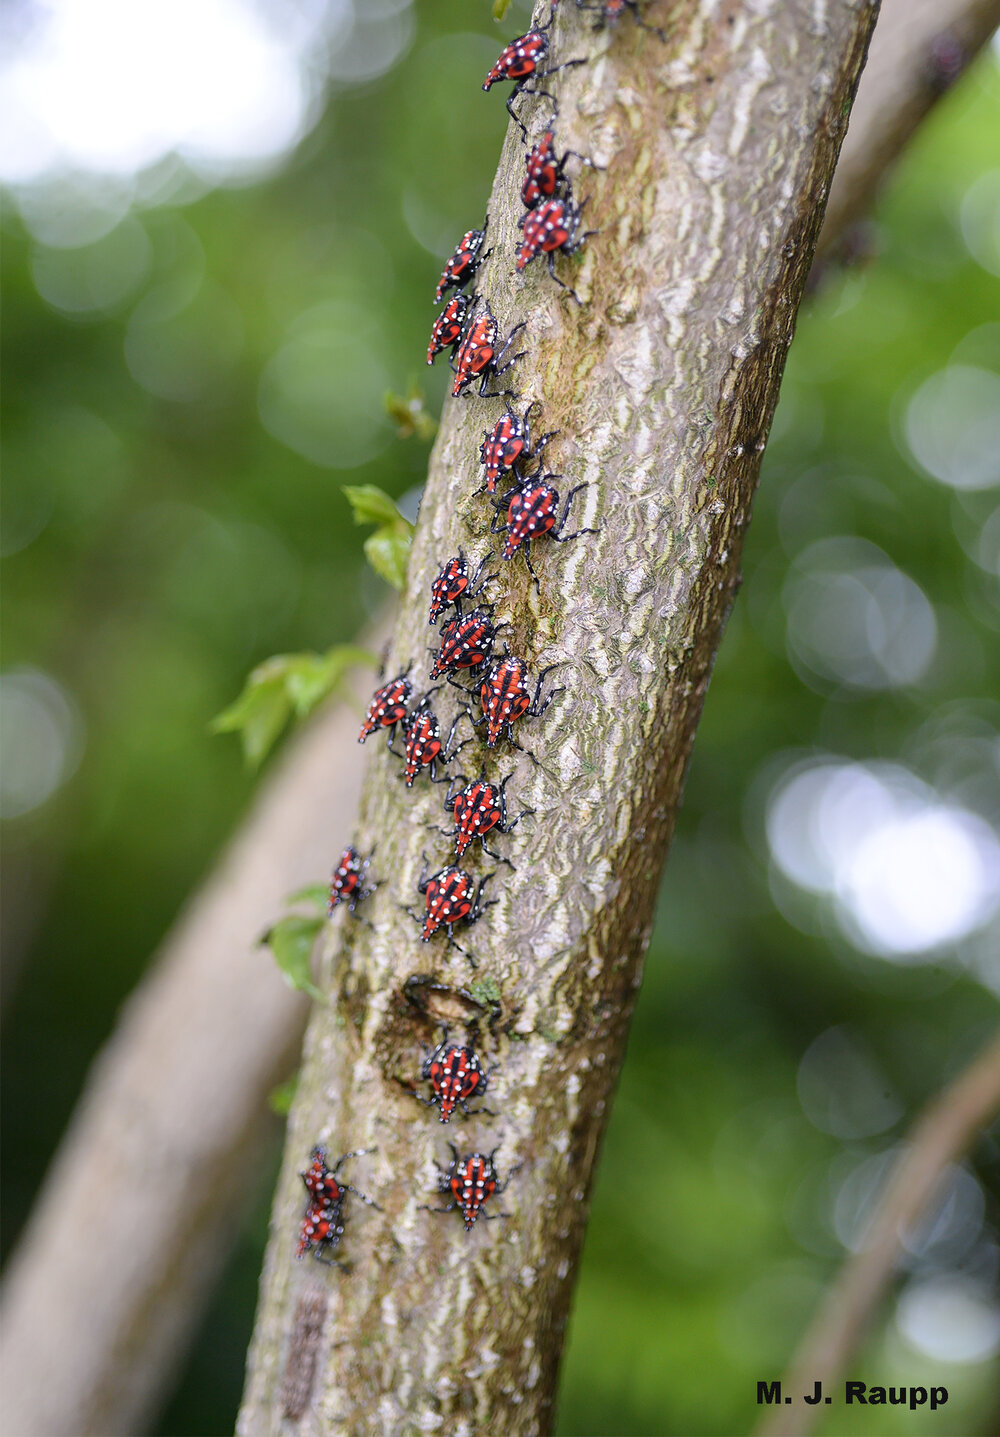 In deciduous forests spotted lanternfly nymphs traveled surprisingly long distances, up to 65 meters from a point of release.